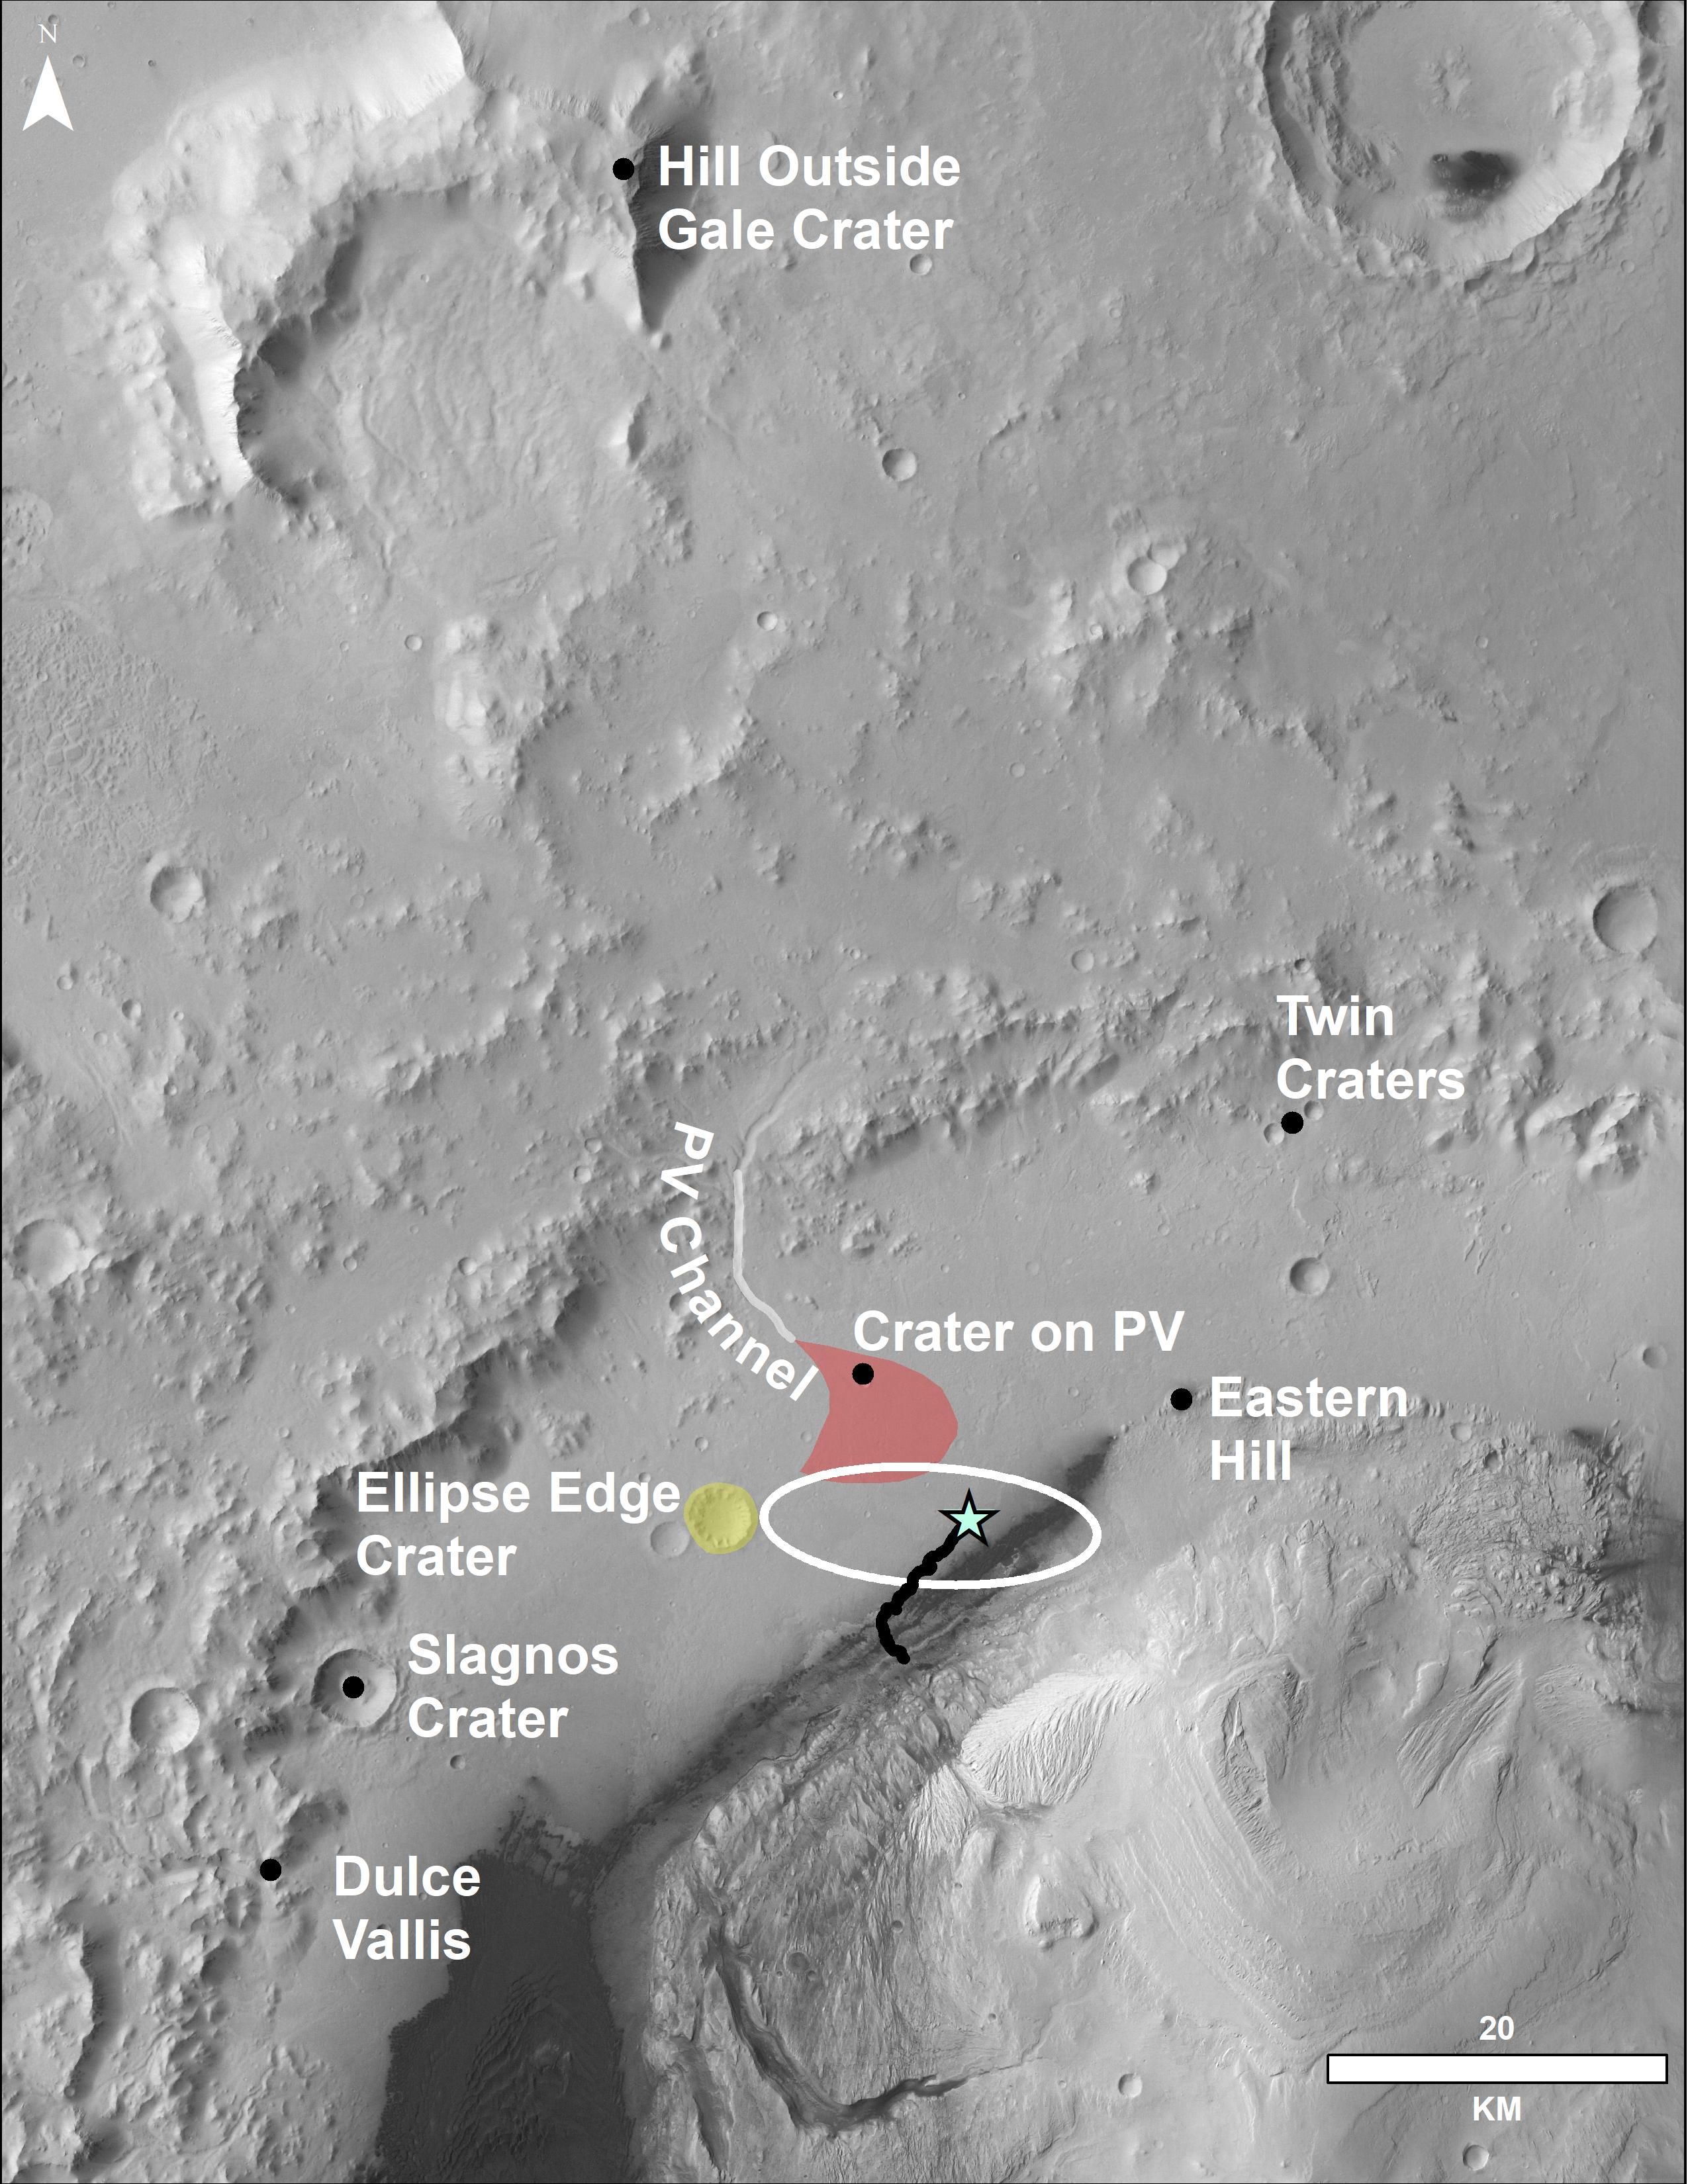 This image of the northwestern portion of Mars' Gale Crater and terrain north of it, from the European Space Agency's Mars Express orbiter, provides a locator map for some features visible in an October 2017 panorama from NASA's Curiosity Mars rover.